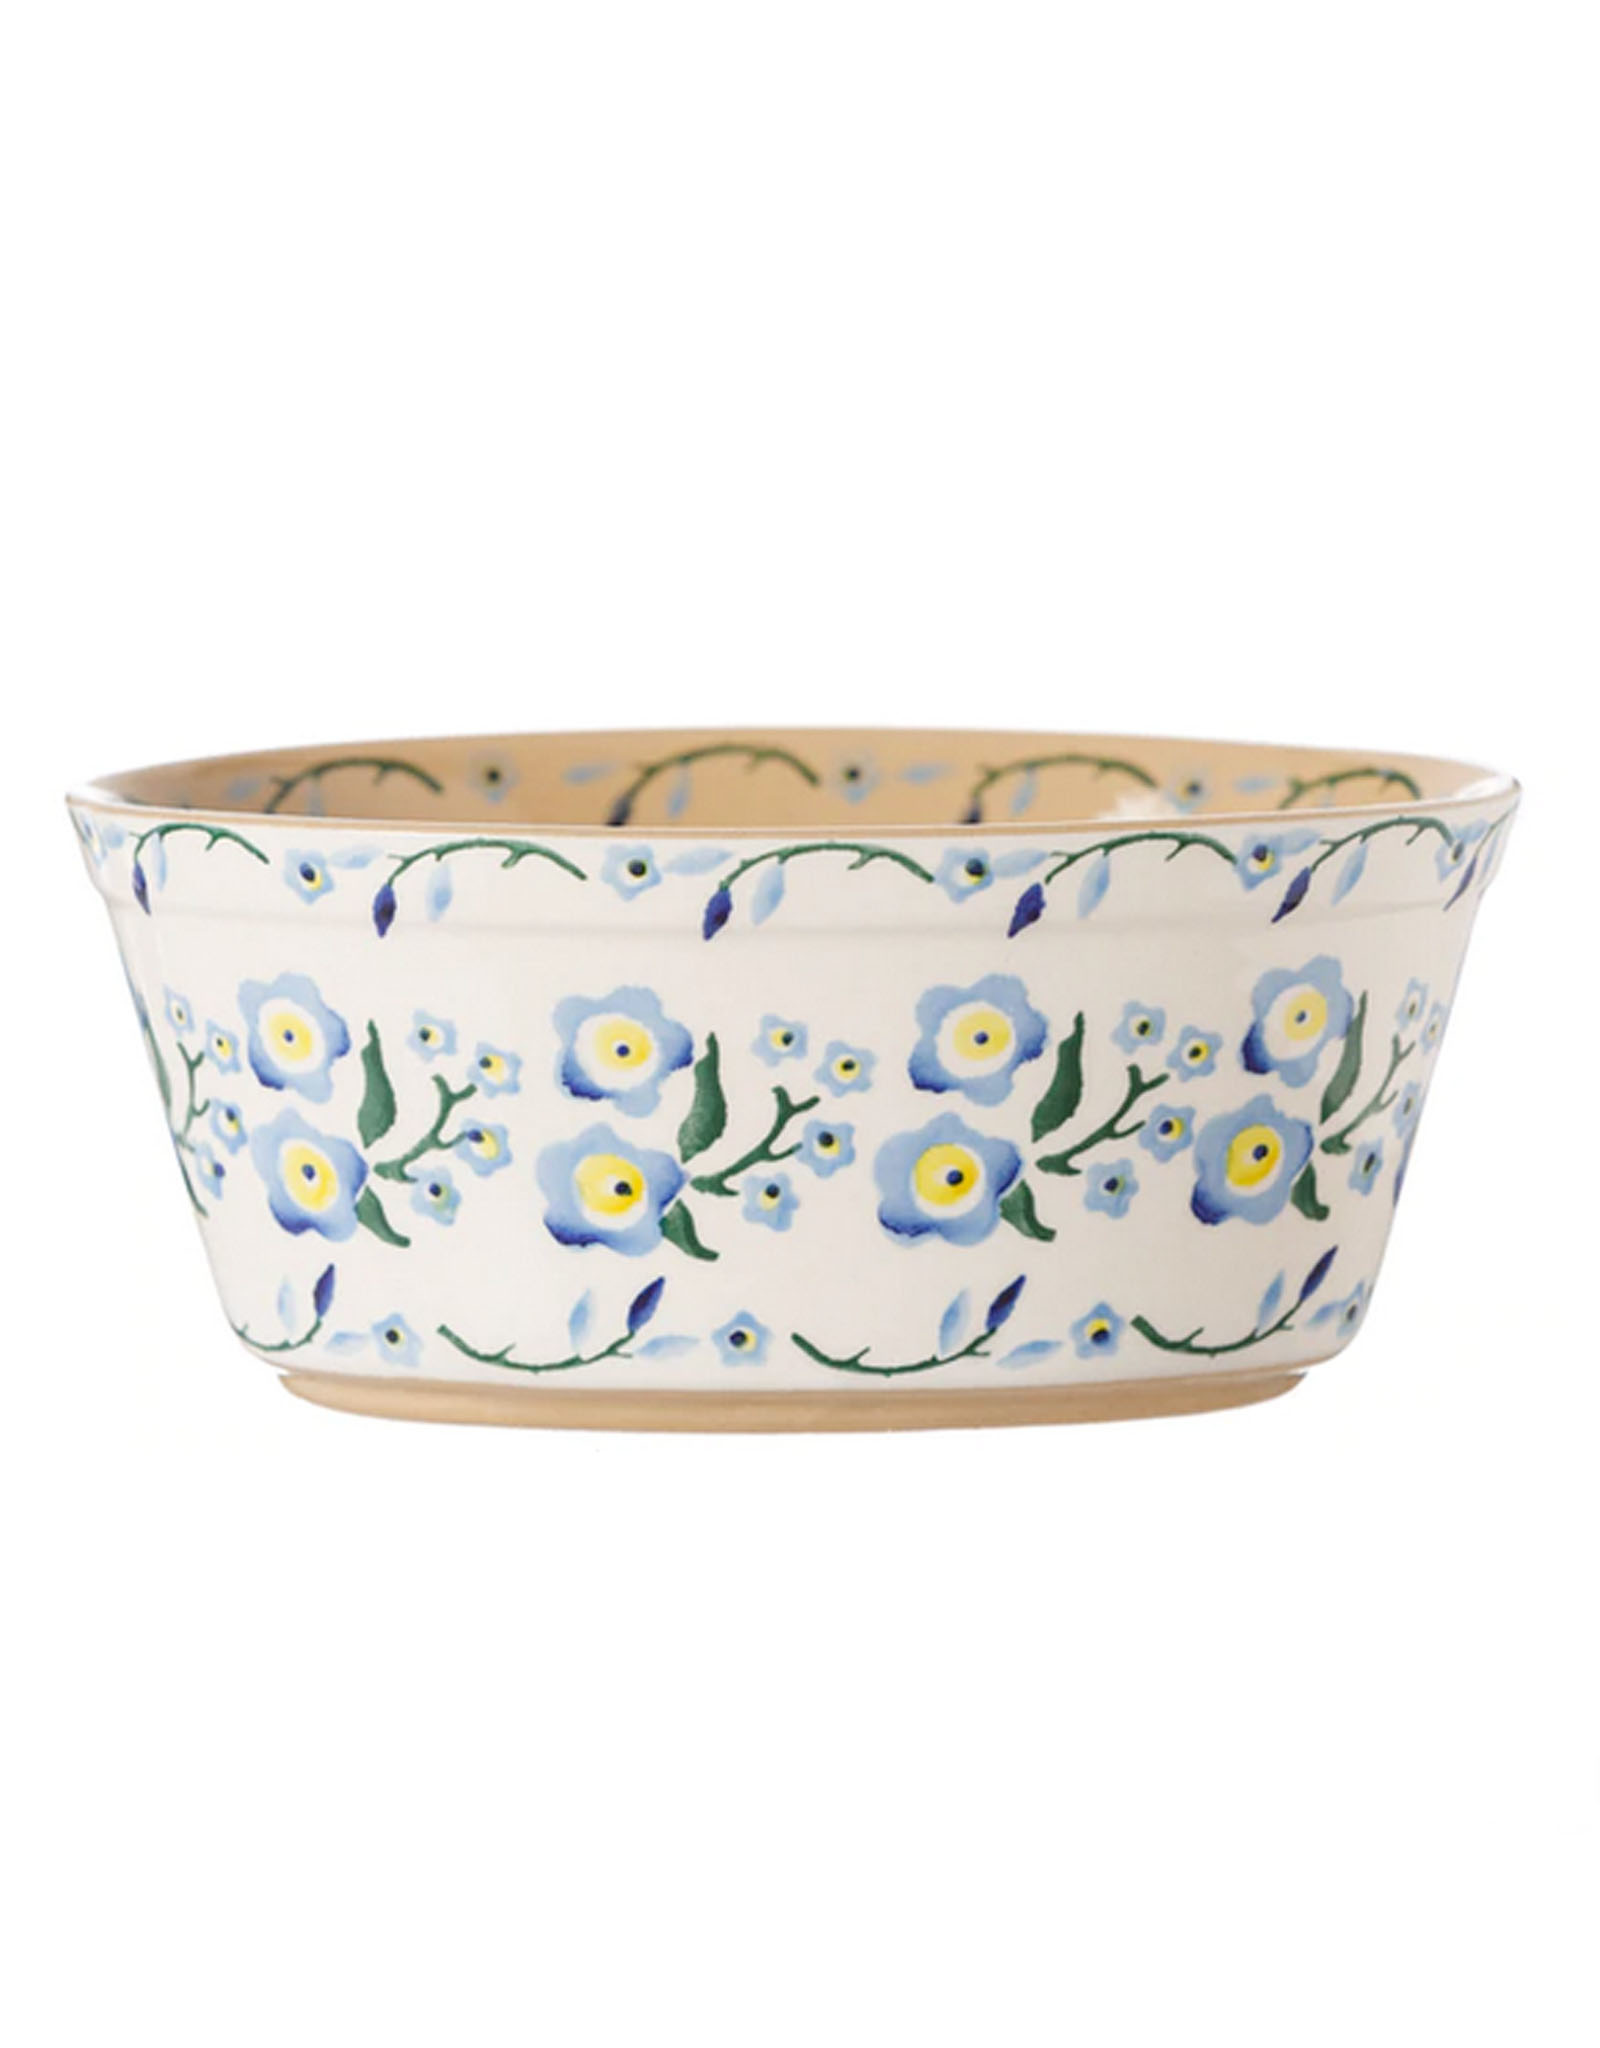 KITCHEN & ACCESSORIES NICHOLAS MOSSE SMALL OVAL PIE DISH - Forget Me Not